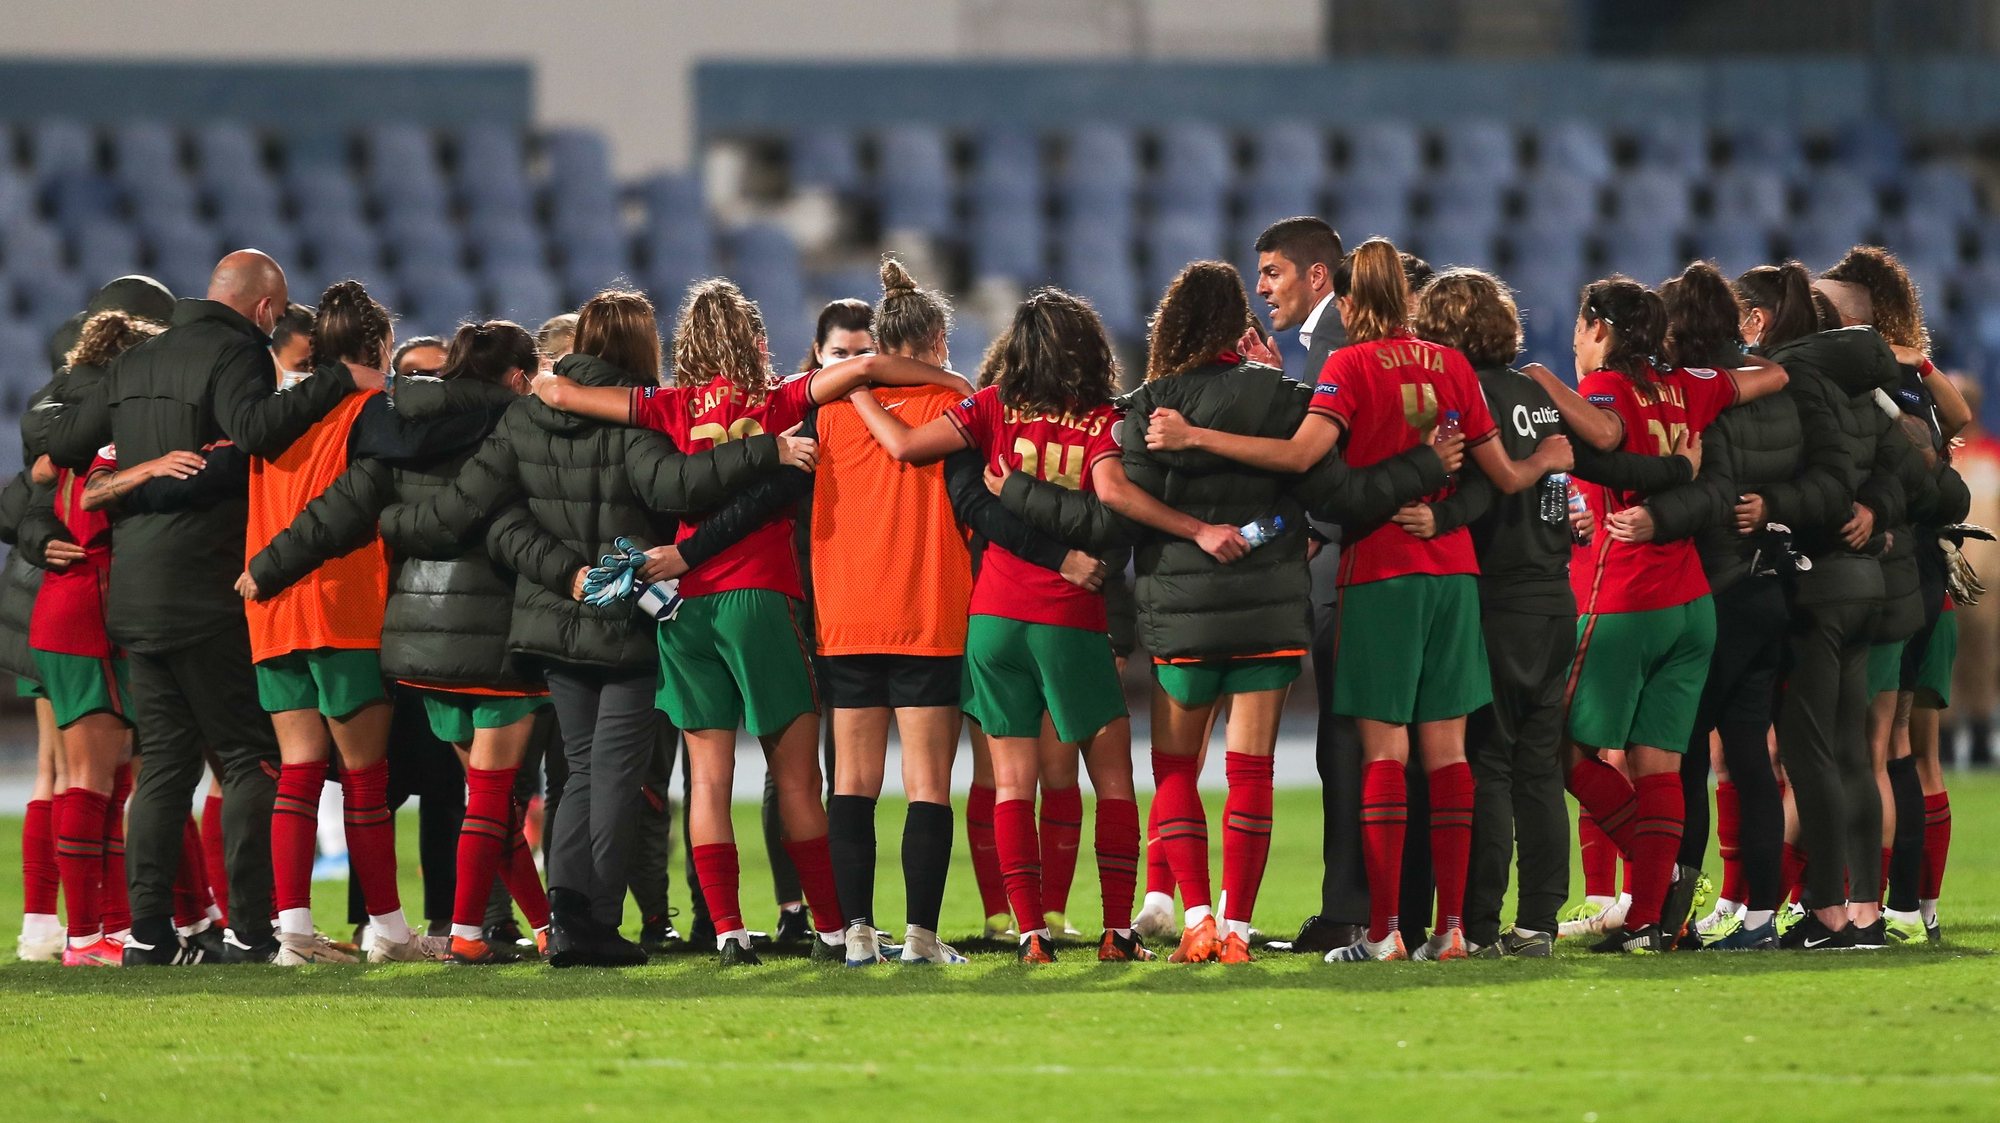 Portugal&#039;s head coach Francisco Neto talks the her players in the end of UEFA Women&#039;s EURO play-off match against Portugal at Restelo Stadium in Lisbon, 9 of April 2021. MIGUEL A. LOPES/LUSA